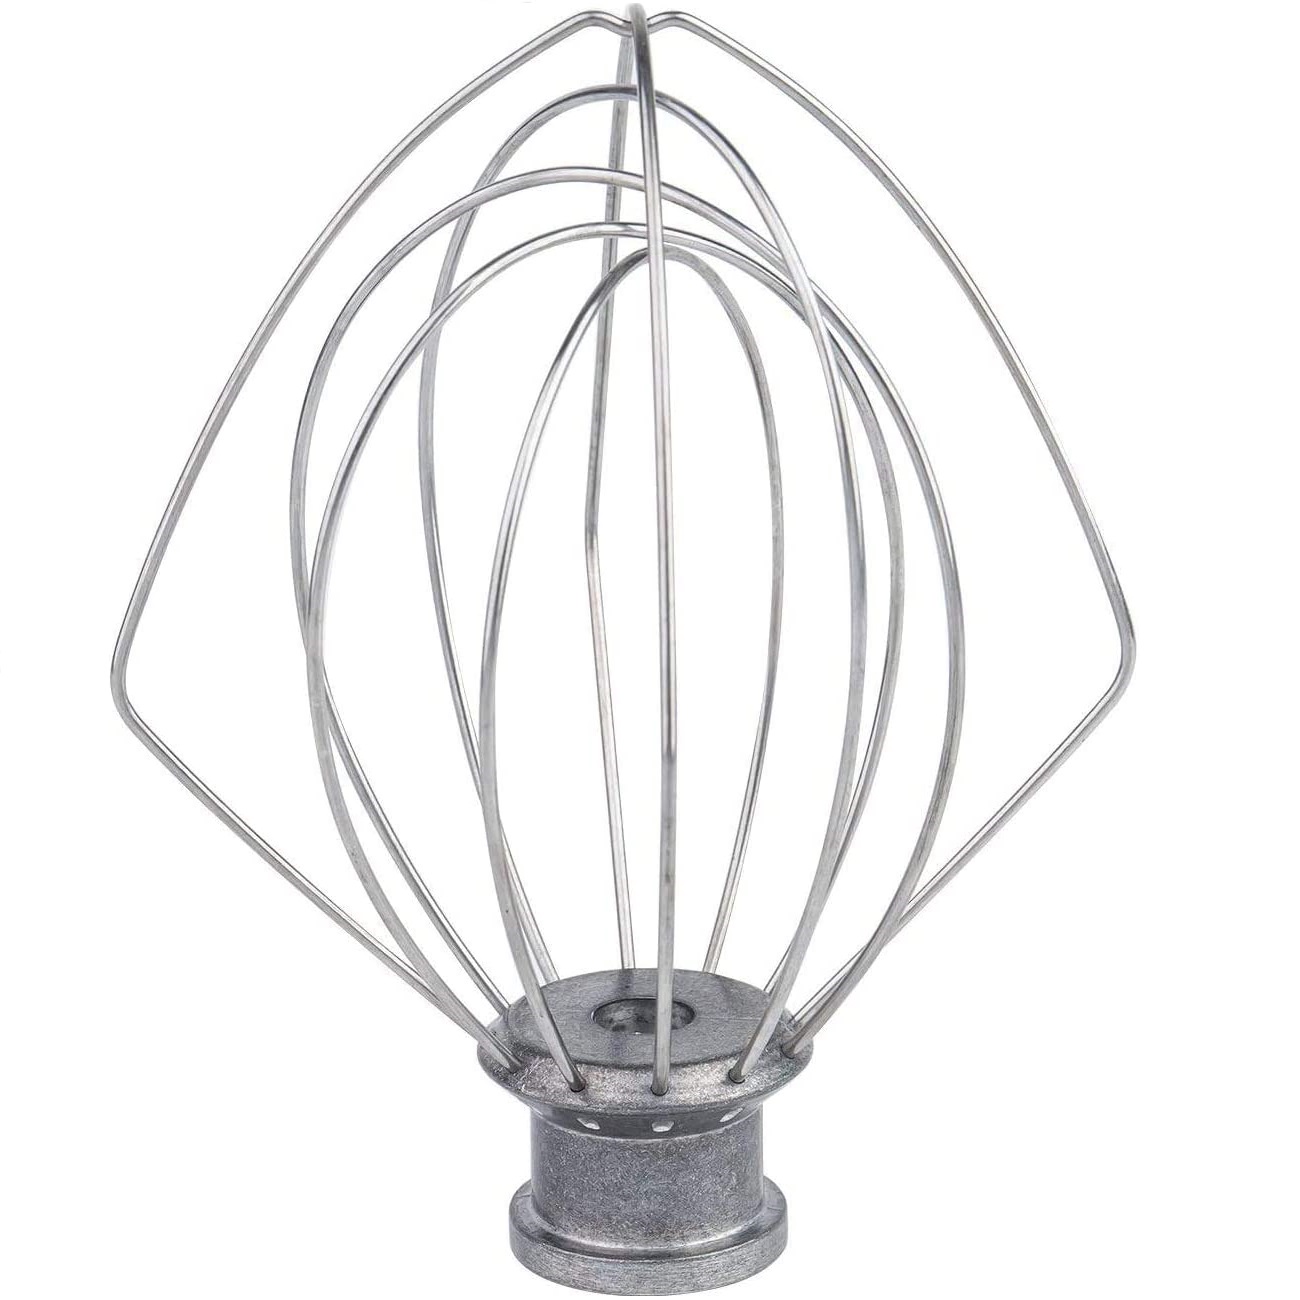 Whisk Attachment for KitchenAid Tilt-Head Stand Mixer K45ss, K45 Wire Whip.